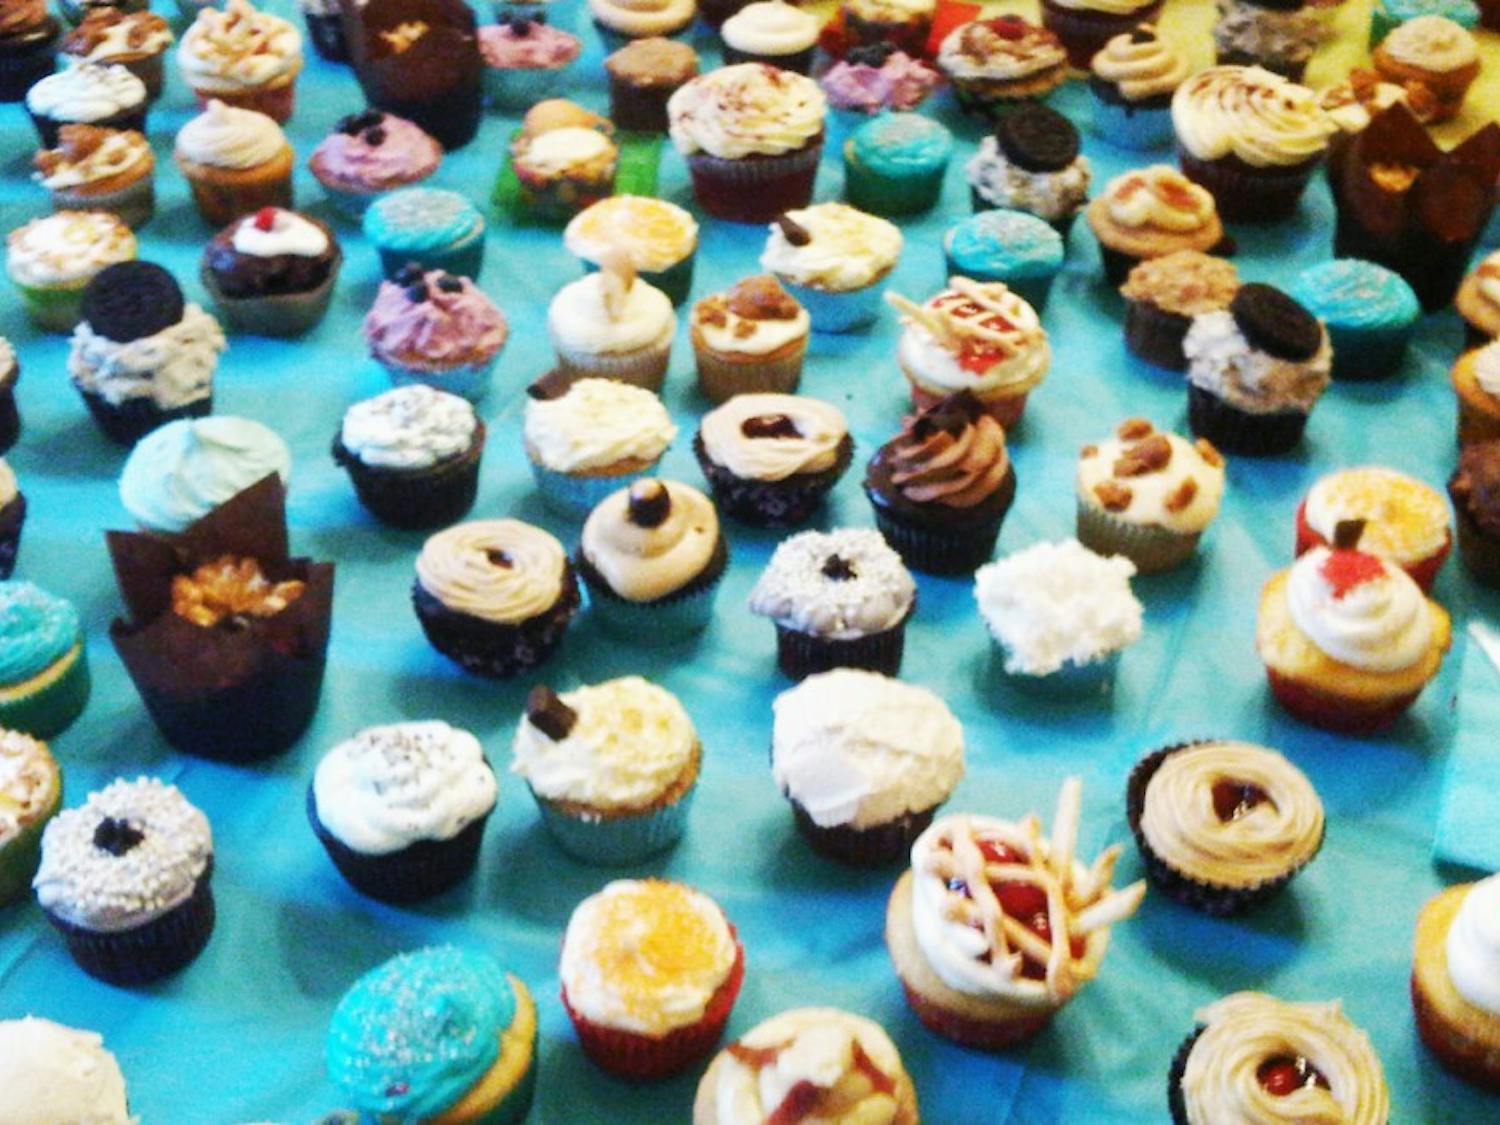 	The Cupcake Challenge is part of the Cupcake Festival, an annual event held in memory of UNC philosophy professor Horace Williams.